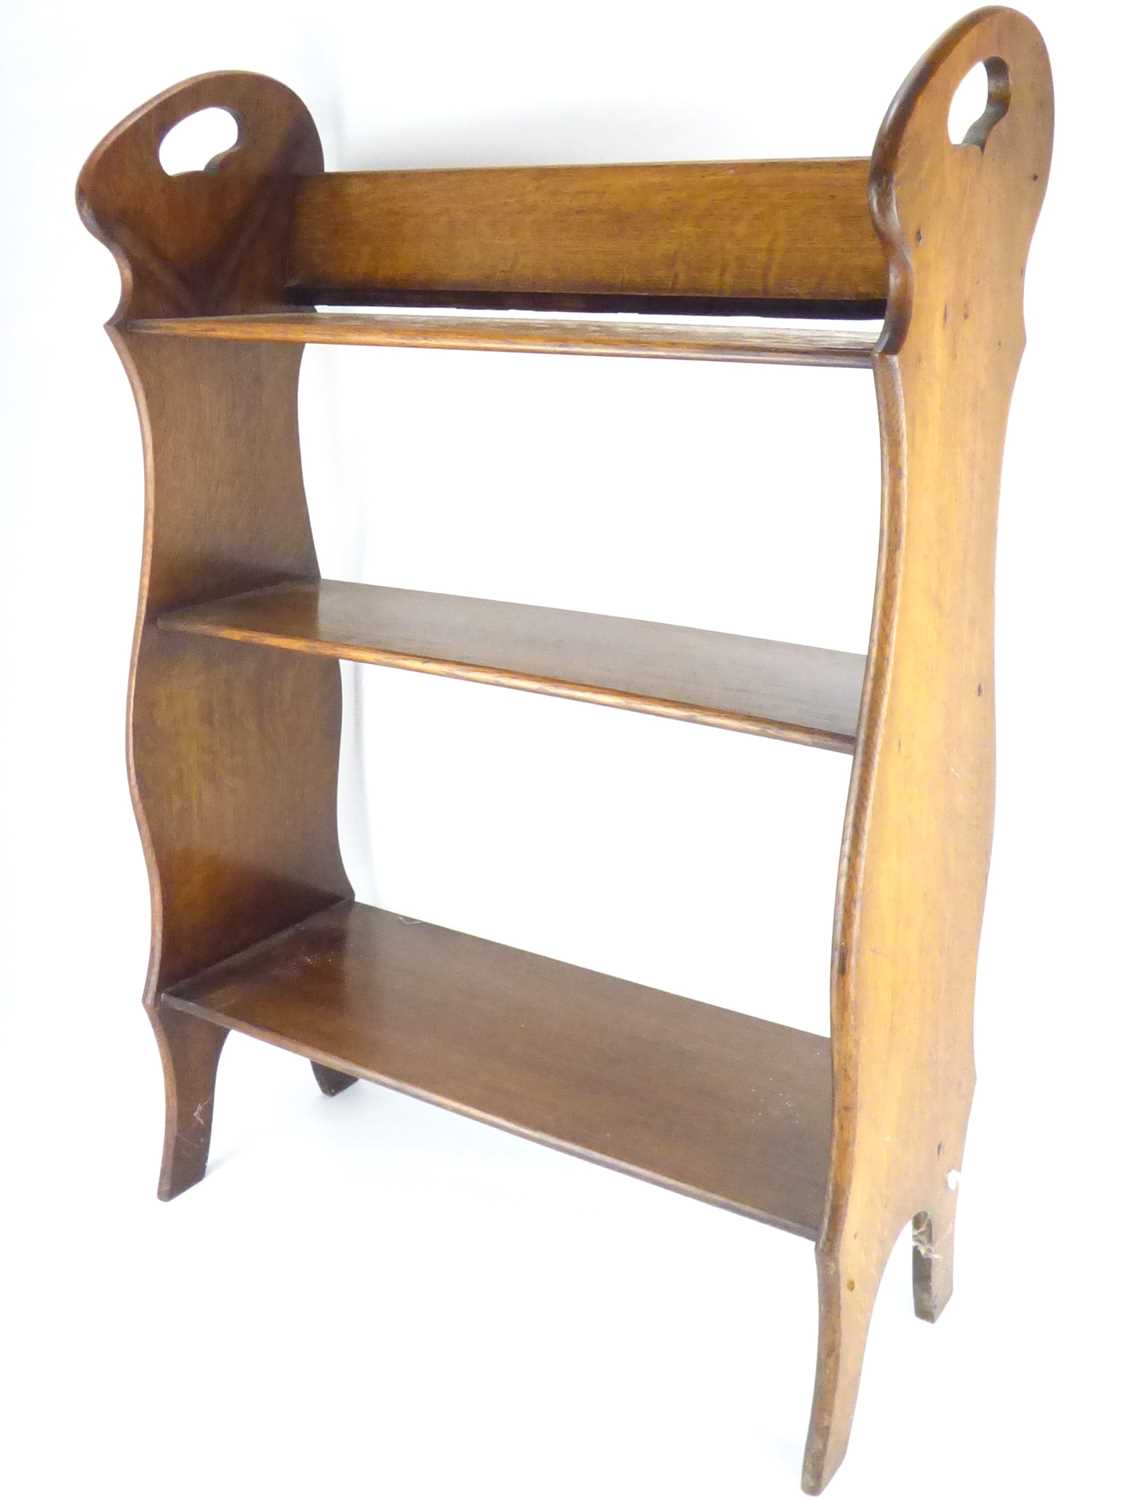 An Arts & Crafts style oak floorstanding bookcase with three shelves and side handle cut- - Image 2 of 2